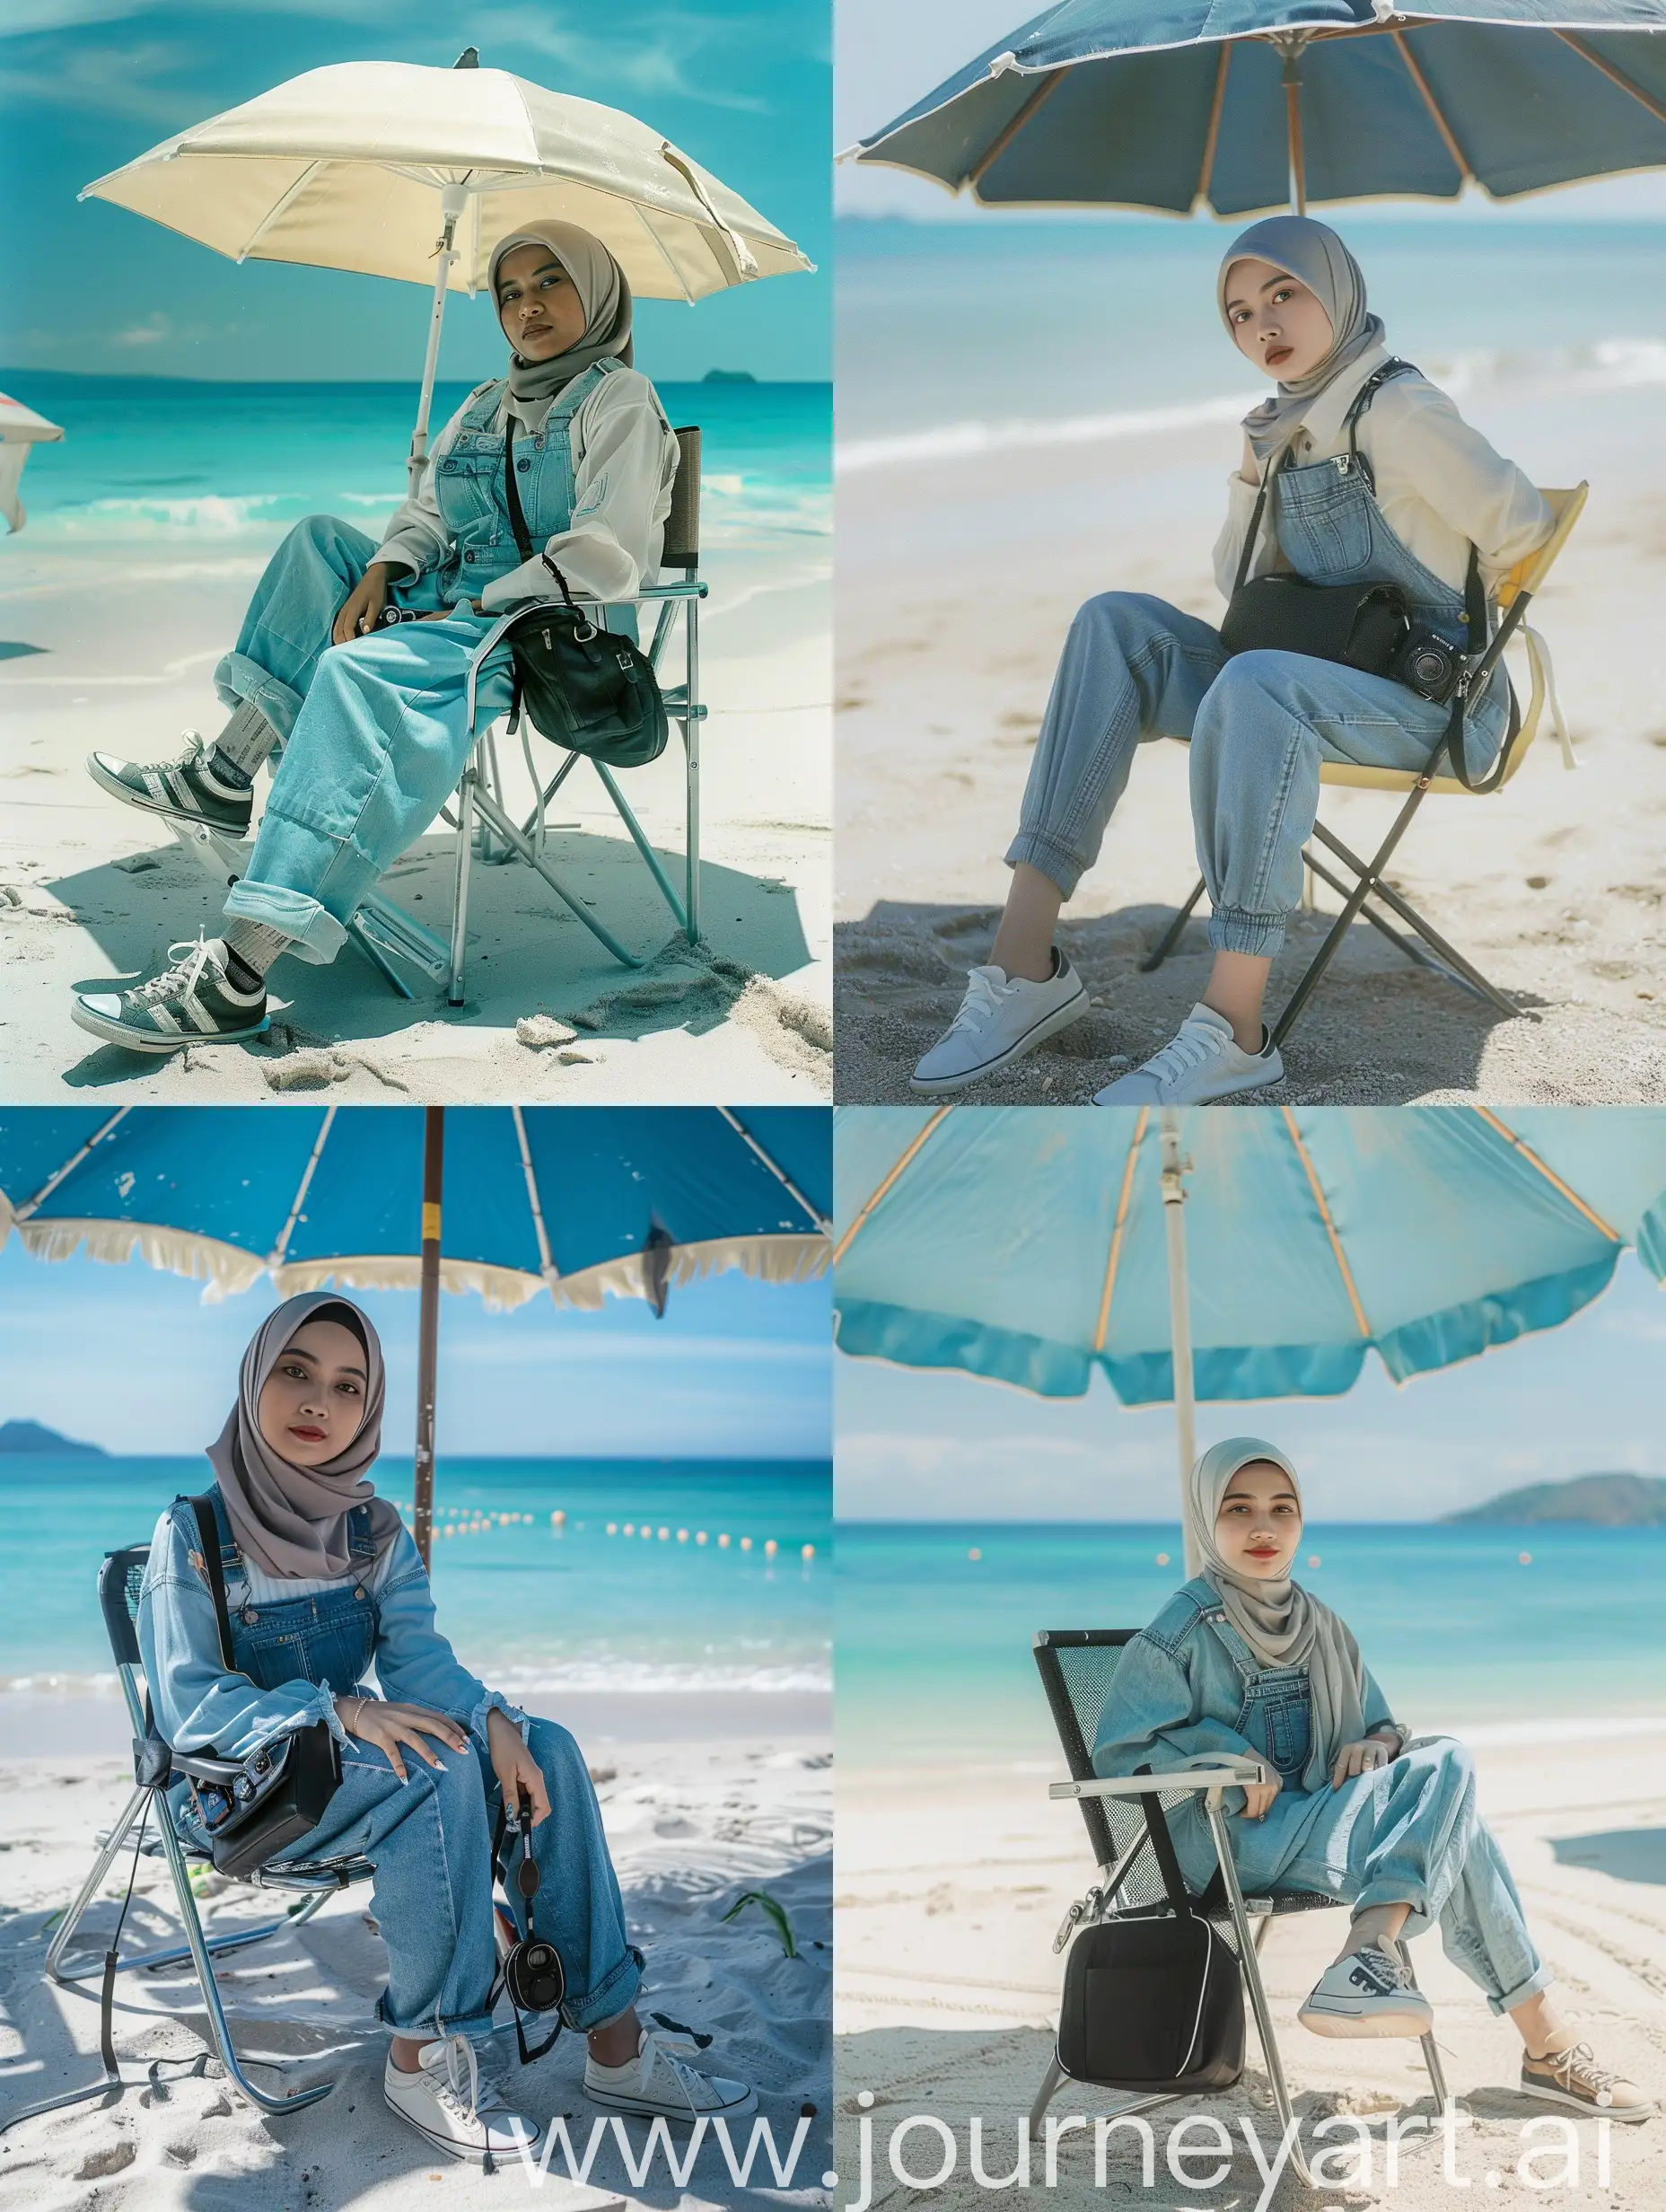 Indonesian-Hijab-Girl-Relaxing-on-Beach-with-Leica-Camera